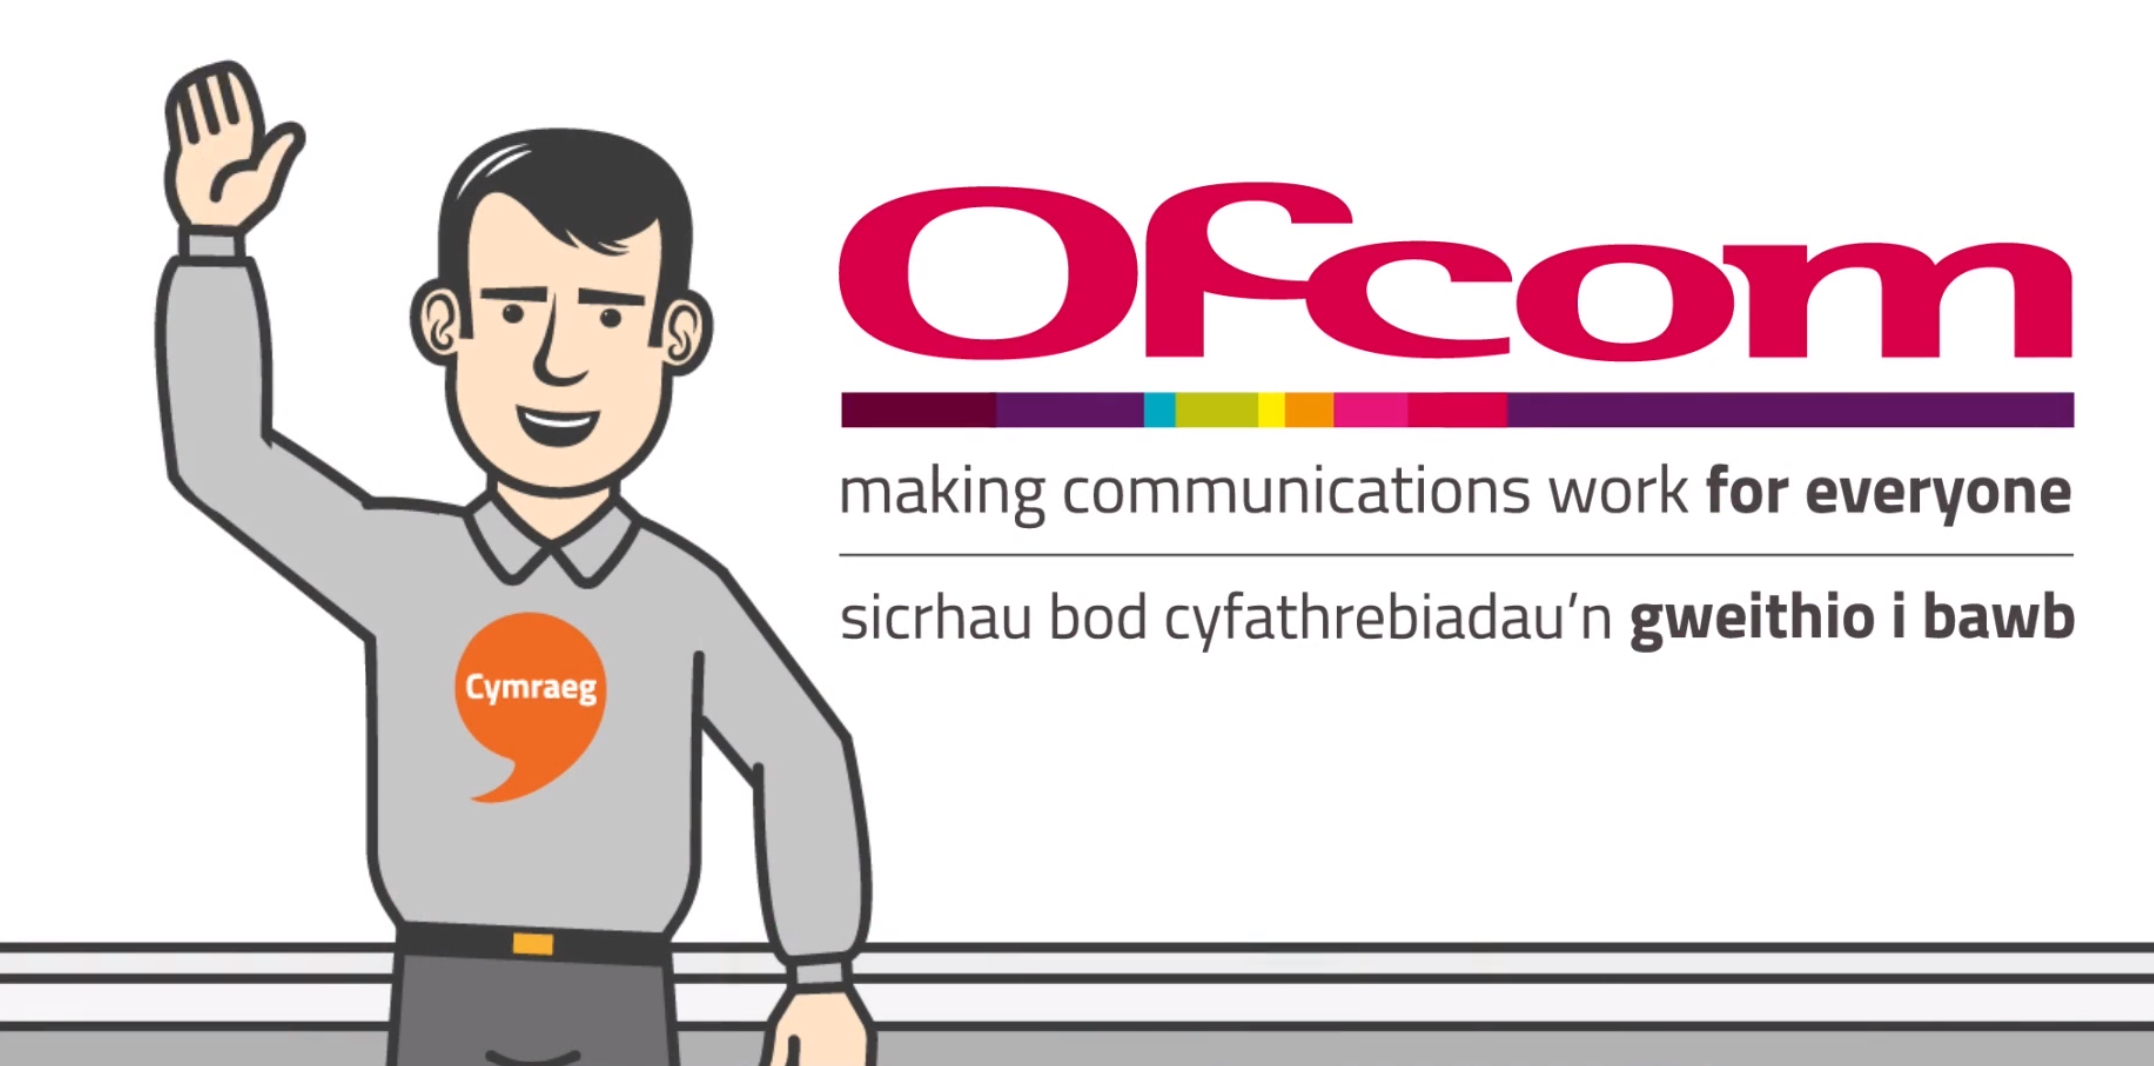 Welsh character next to Ofcom logo